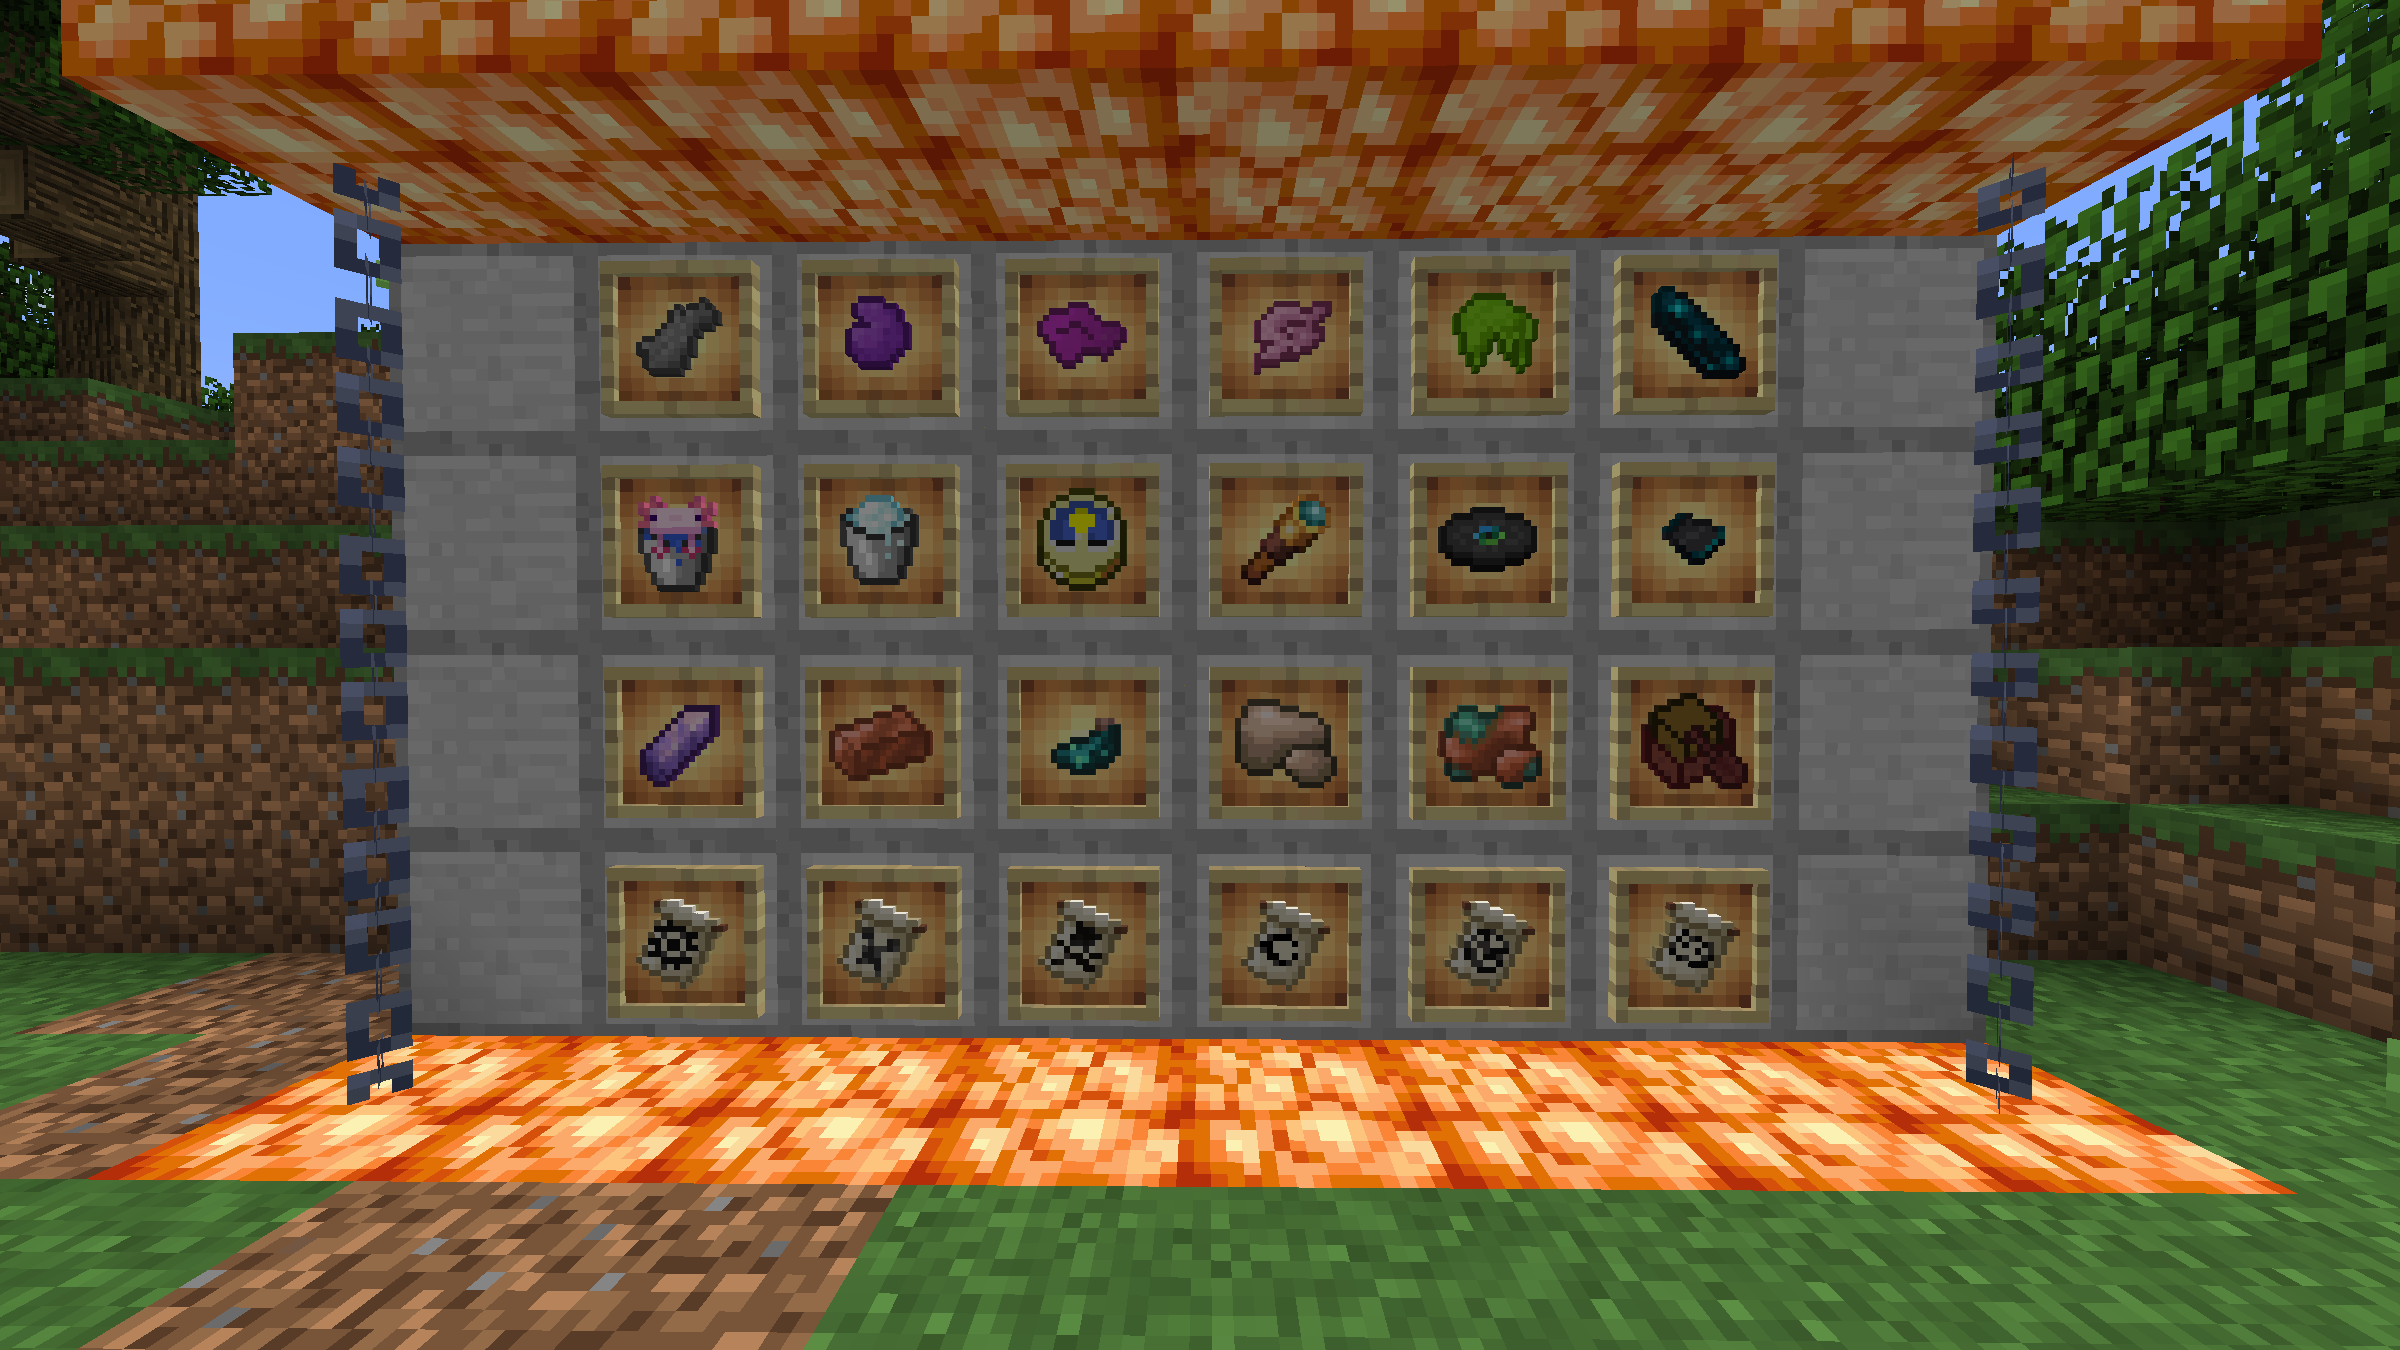 Wall of items